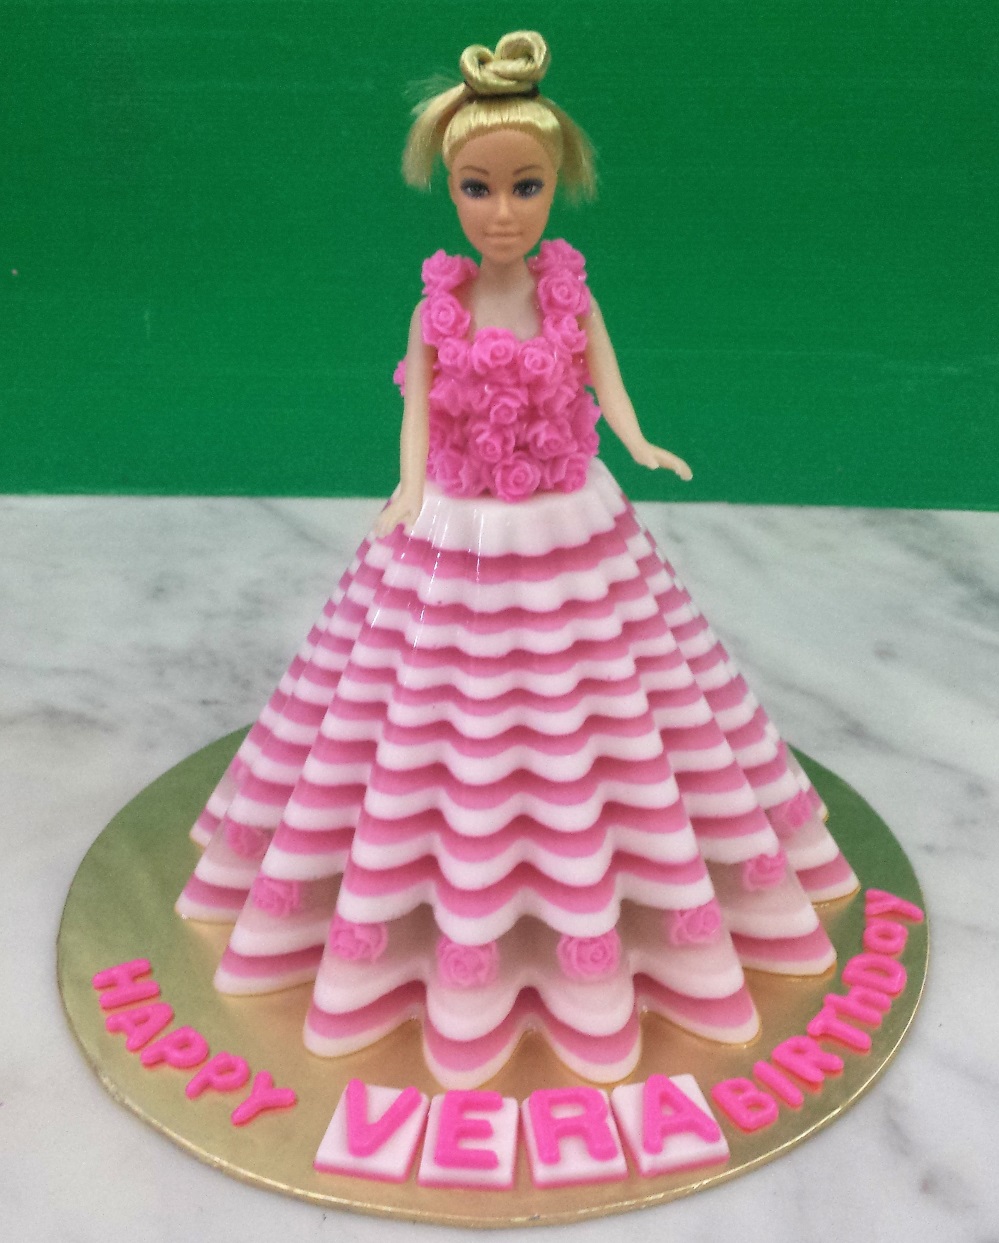 Top 10 Barbie Party food ideas for a Barbie-Themed Birthday Party!